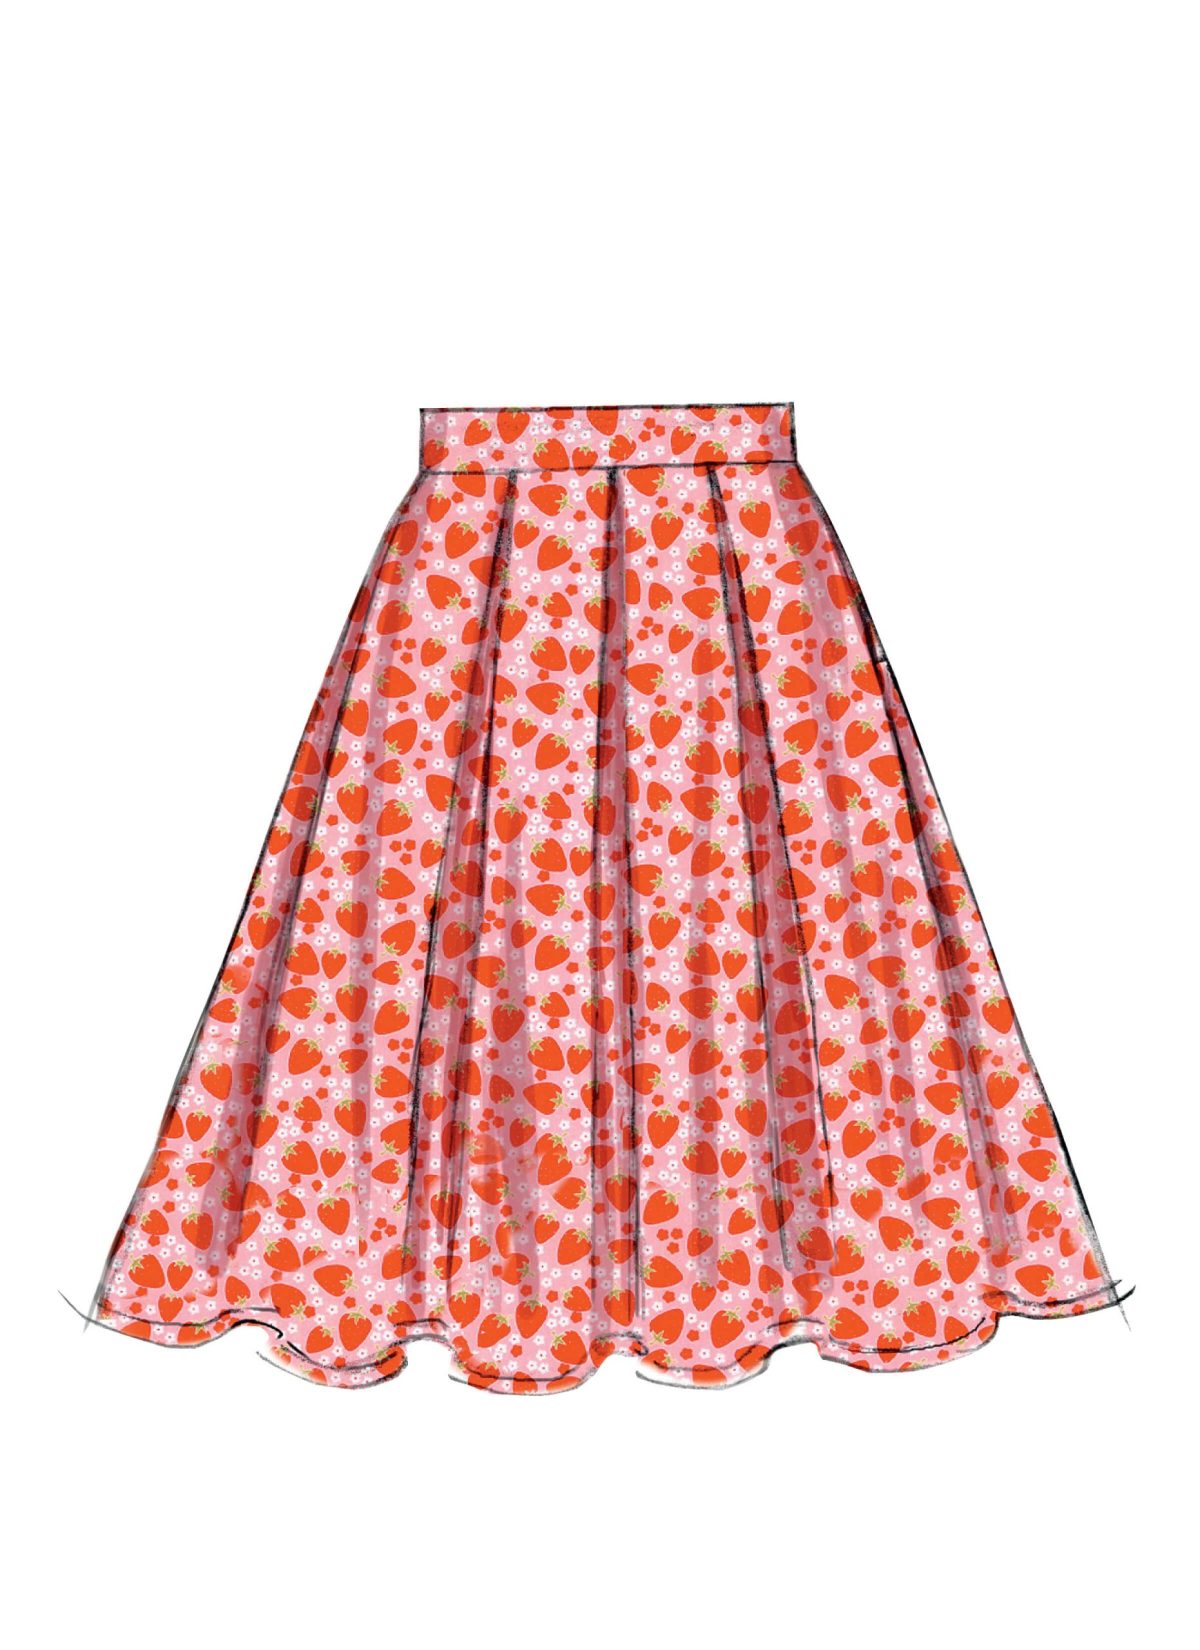 McCall's Sewing Pattern M6706 Misses' Skirts and Petticoat